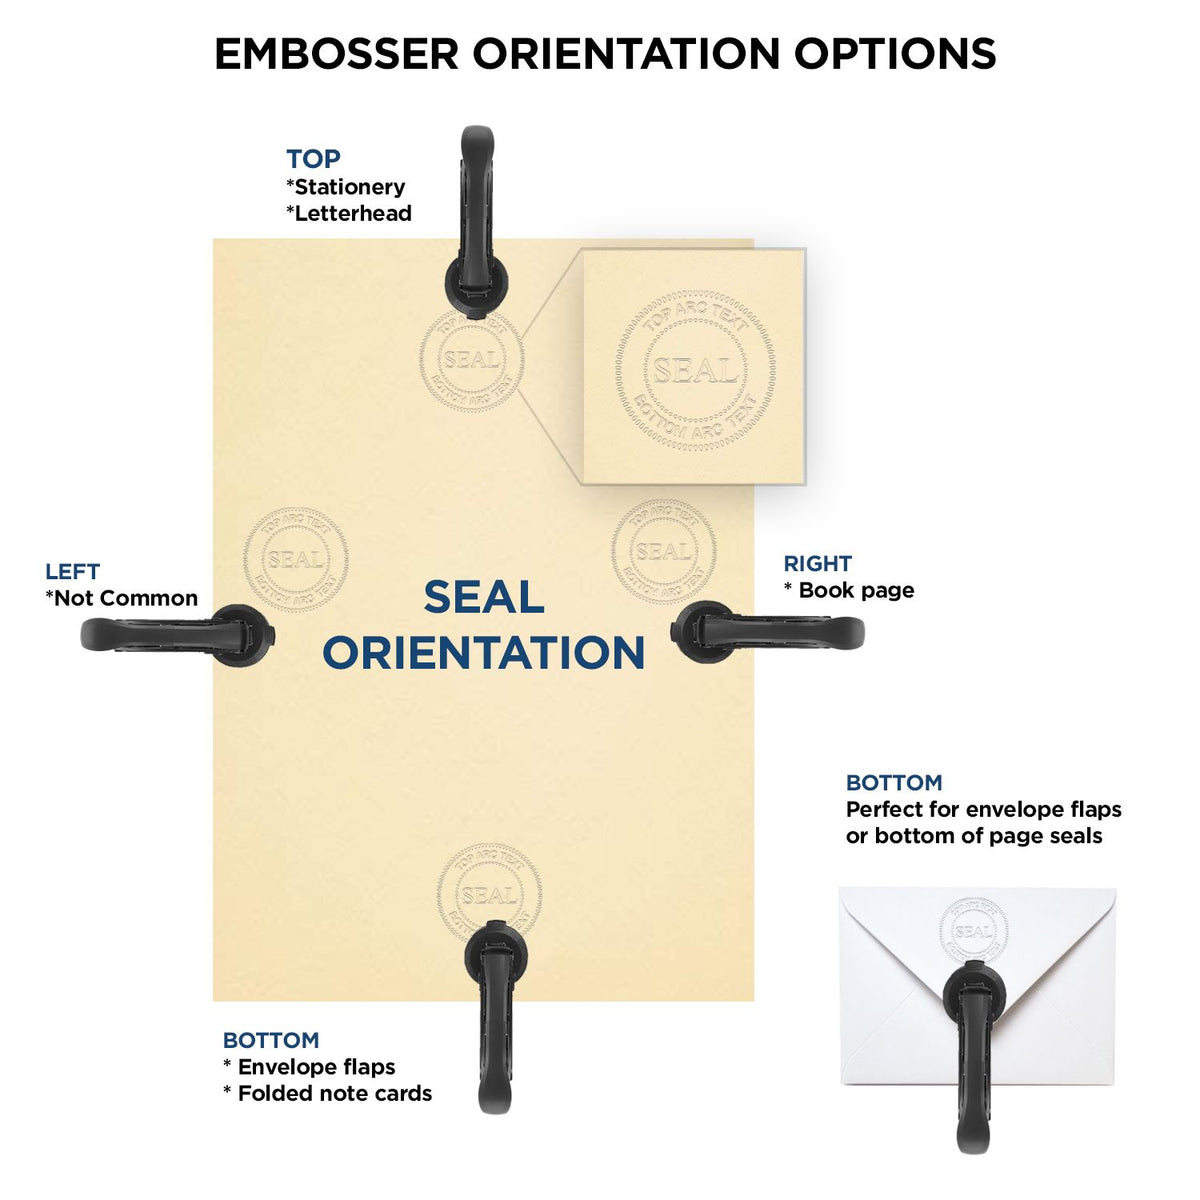 An infographic for the State of Minnesota Extended Long Reach Engineer Seal showing embosser orientation, this is showing examples of a top, bottom, right and left insert.